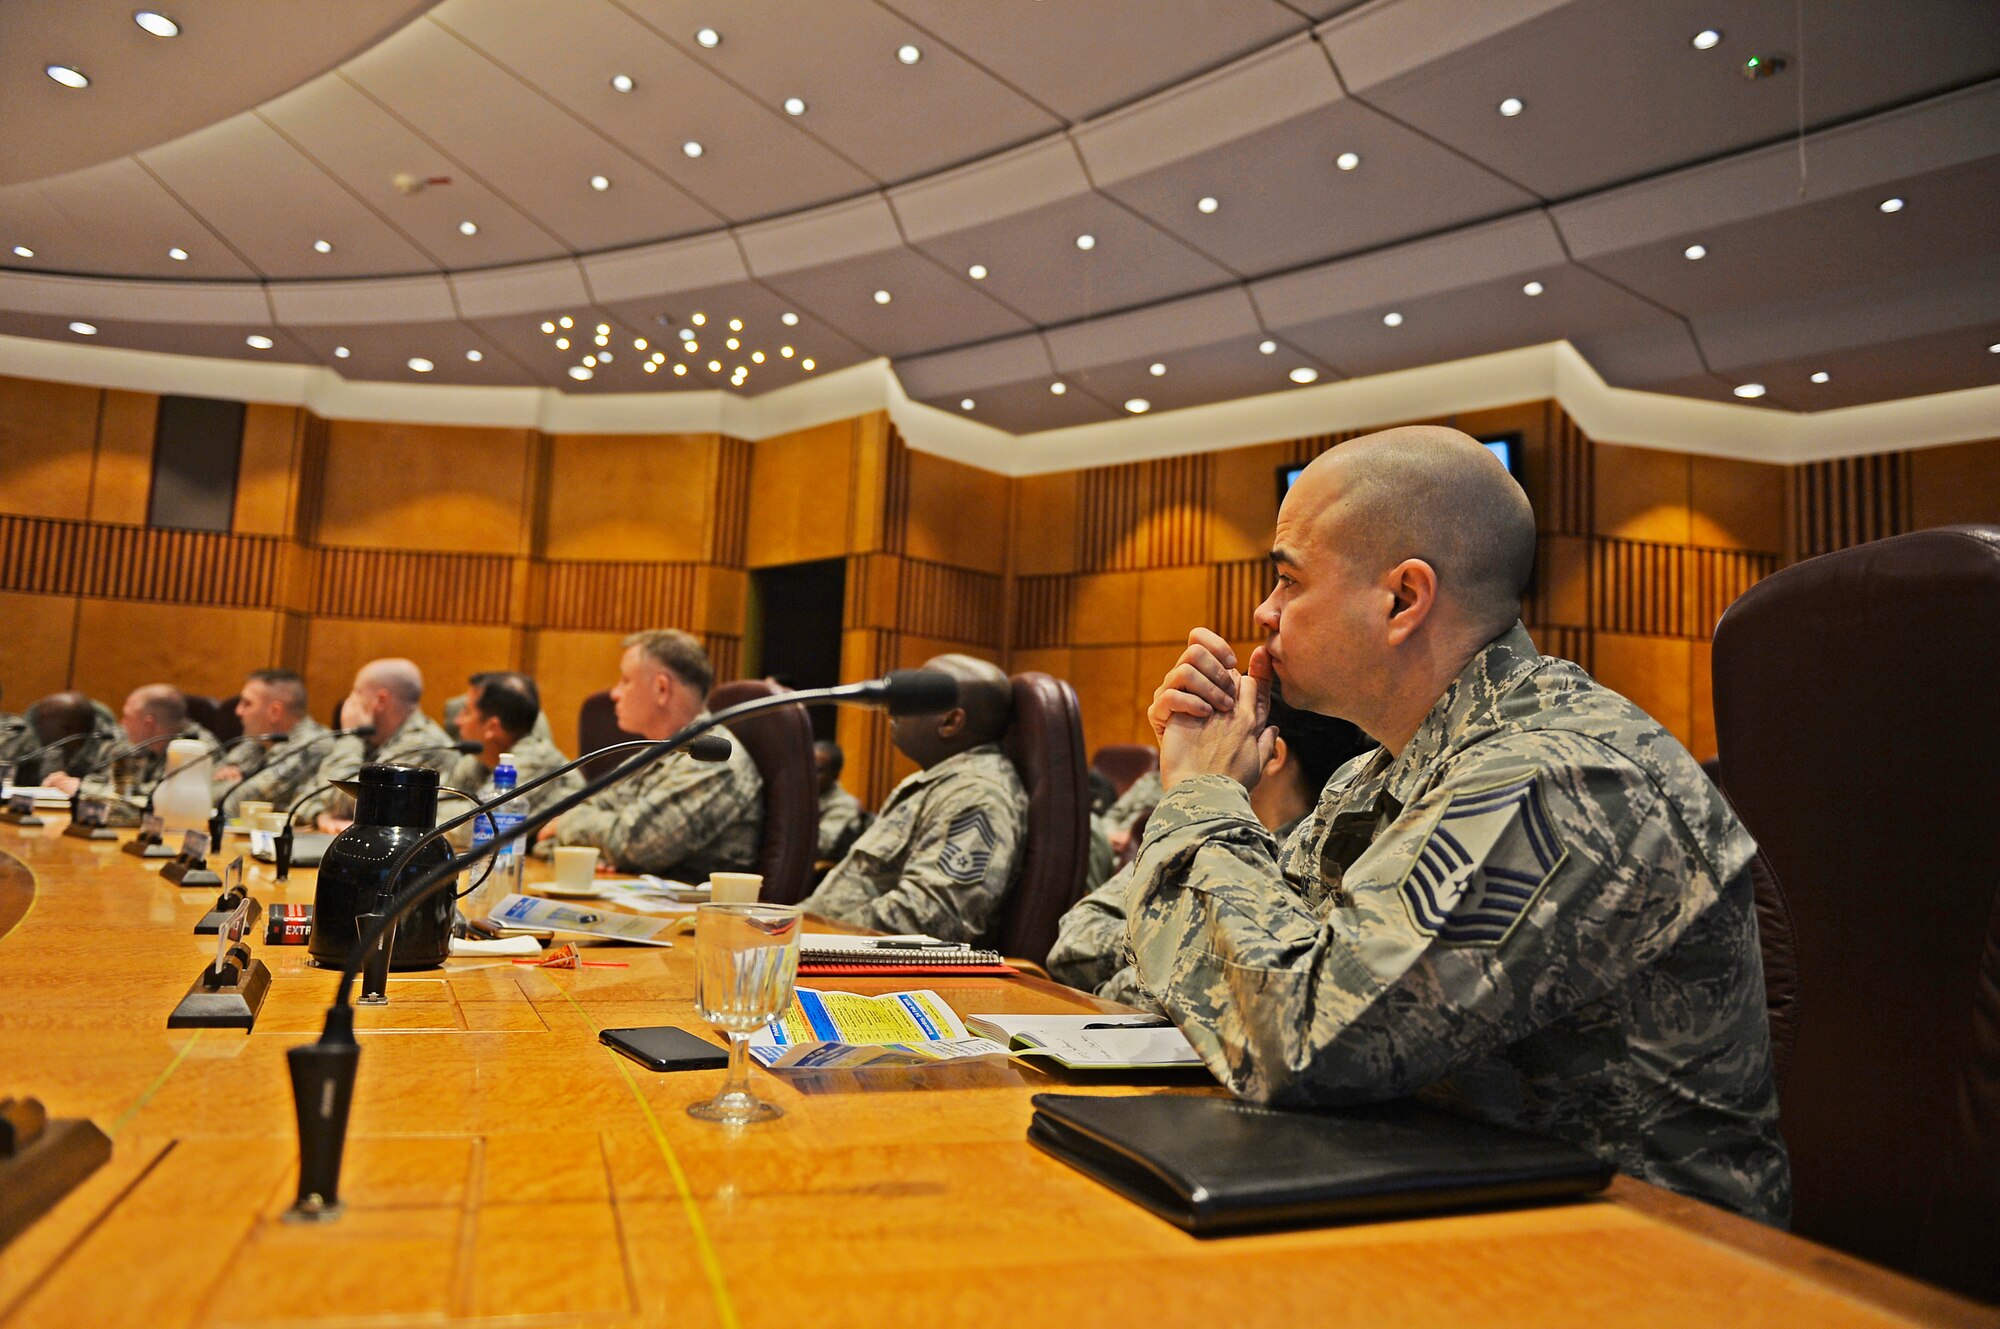 Officials assigned to the 521st Air Mobility Operations Wing participate in a commander’s conference, Feb. 21, 2018, Ramstein Air Base, Germany. Attendees came not only from Ramstein, but from many other installations in countries including Kuwait, Qatar, Turkey and Spain. (U.S. Air Force photo by Senior Airman Joshua Magbanua)